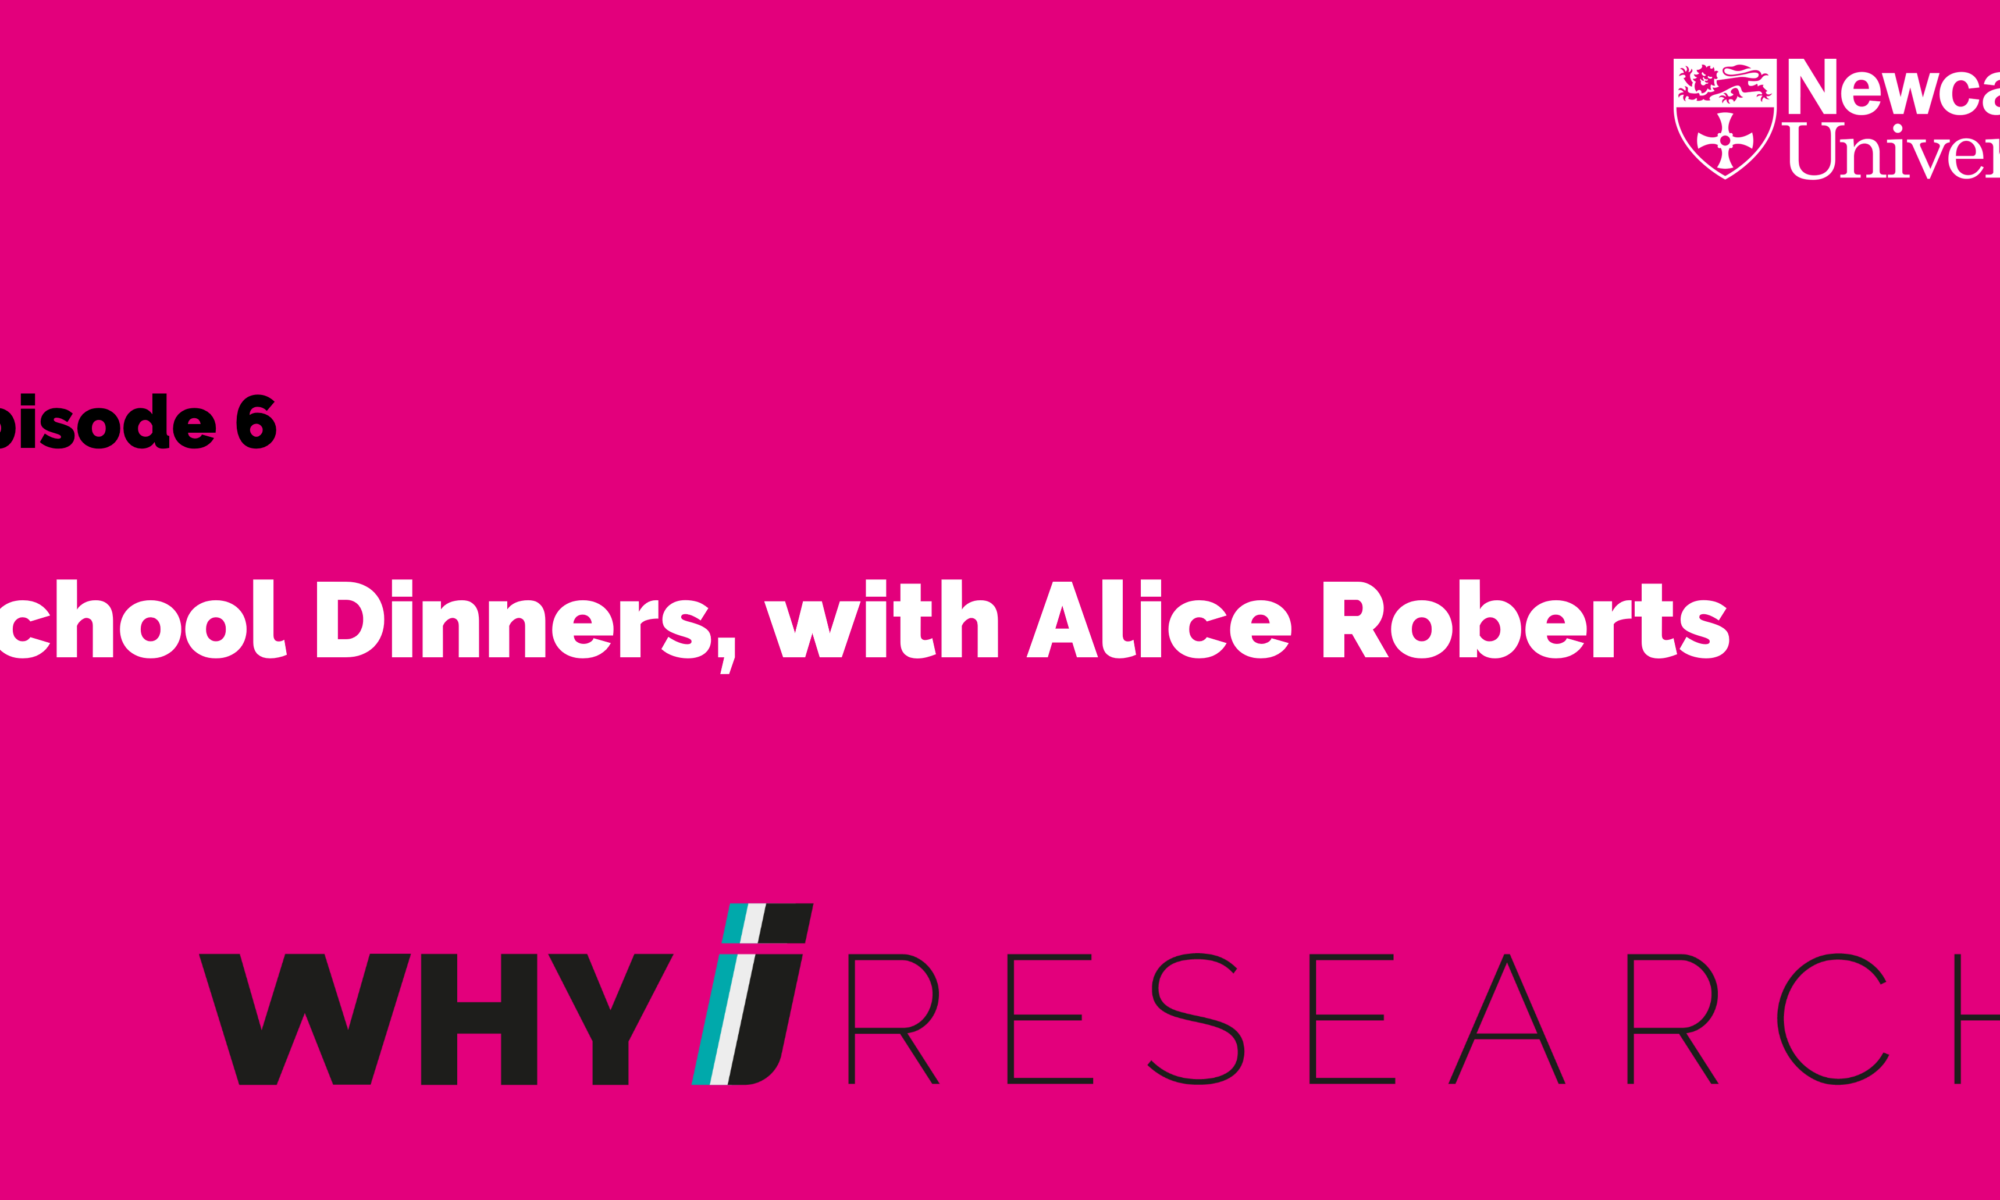 School dinners, with Alice Roberts